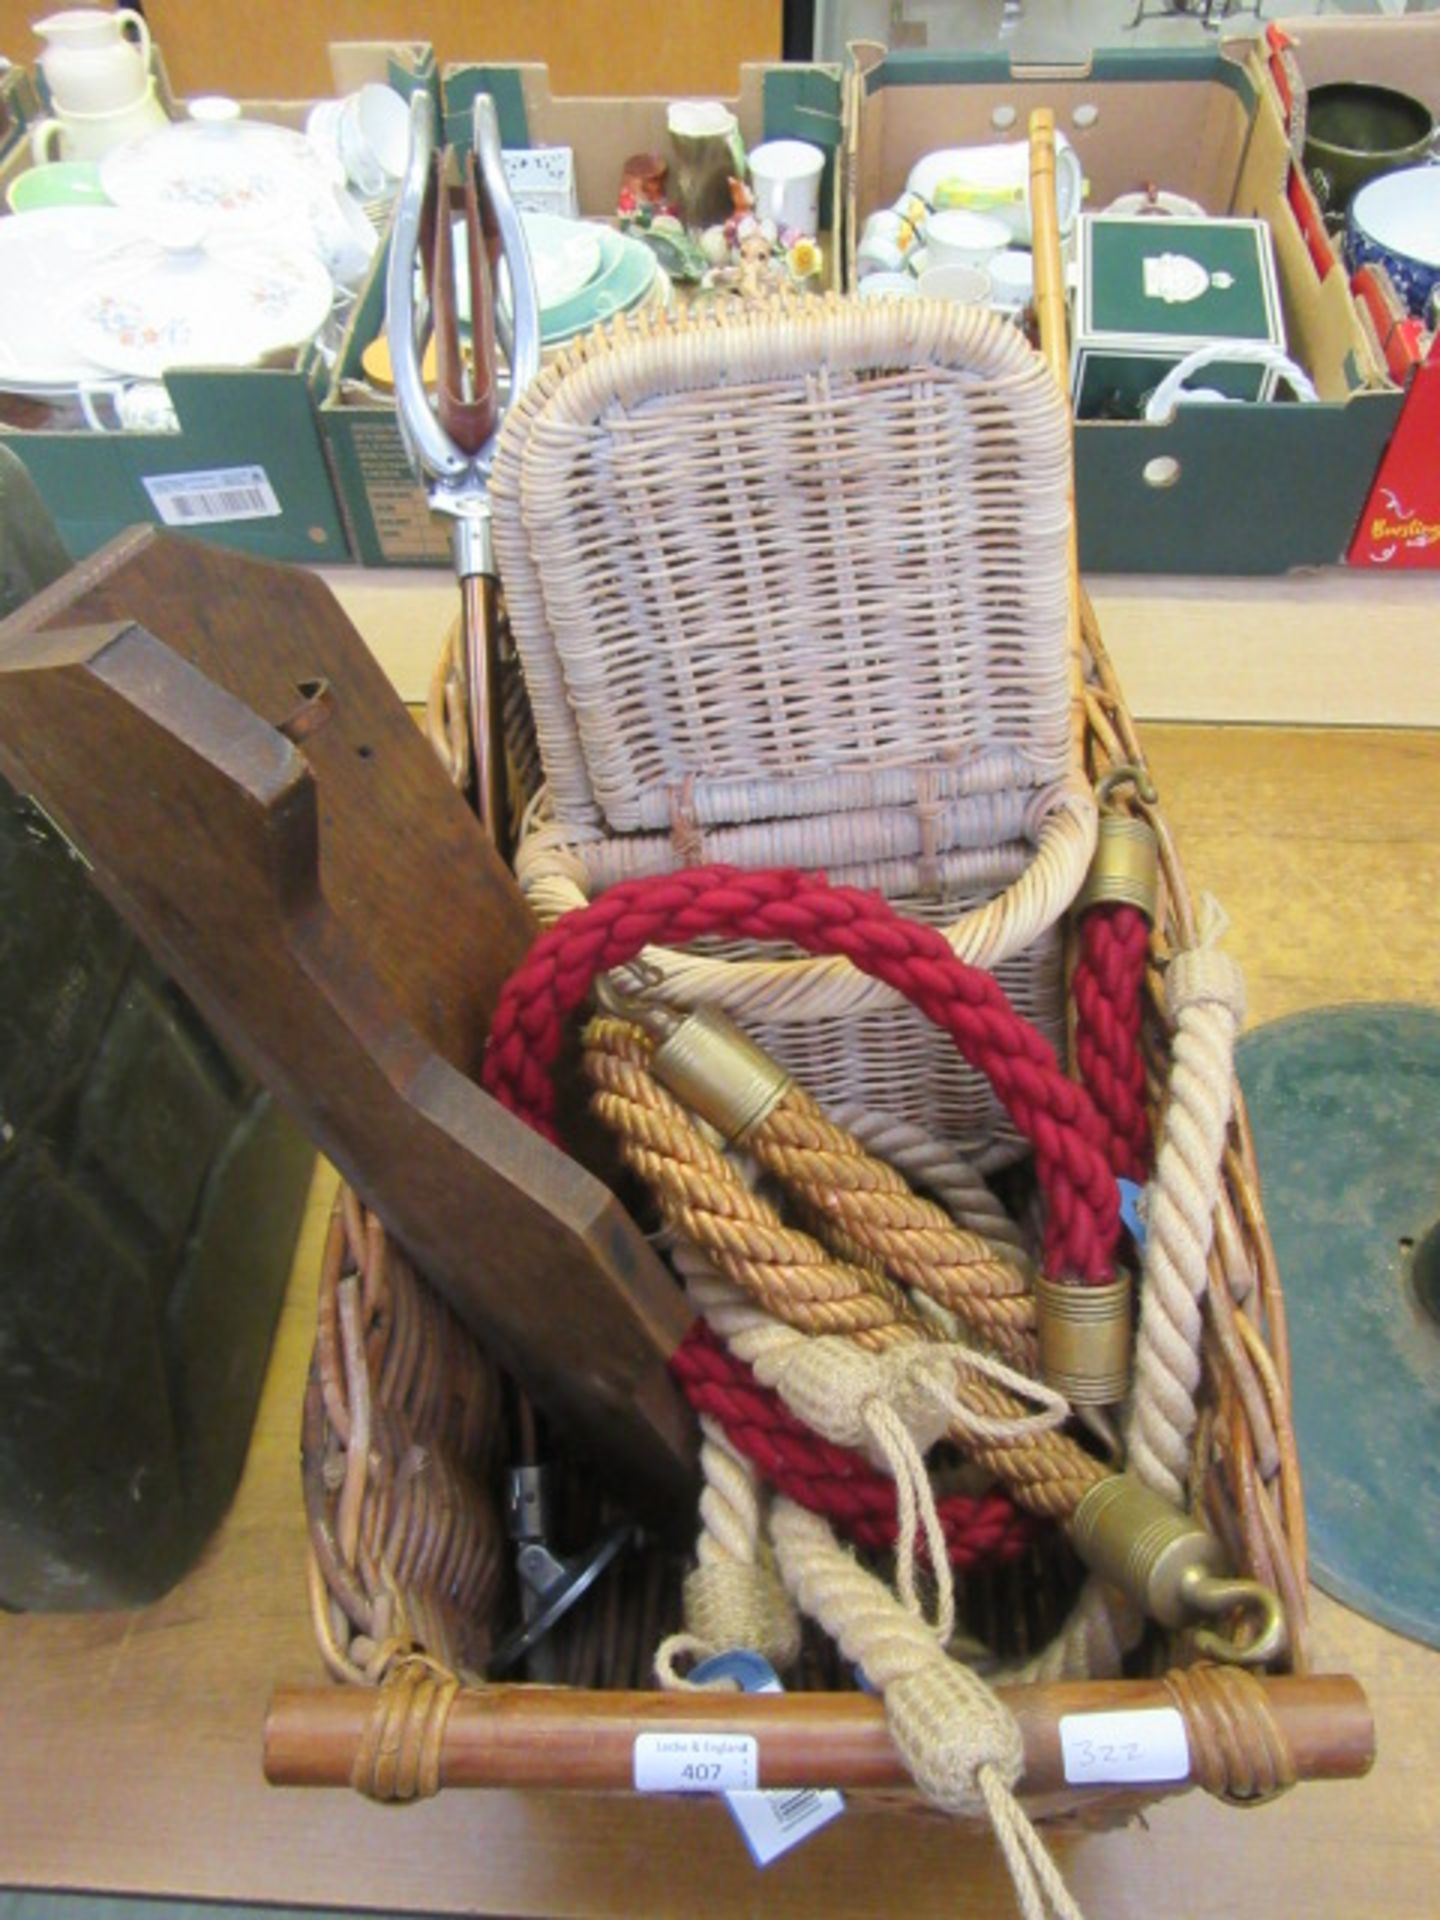 A wicker basket containing shooting stick, walking cane, rope etc.